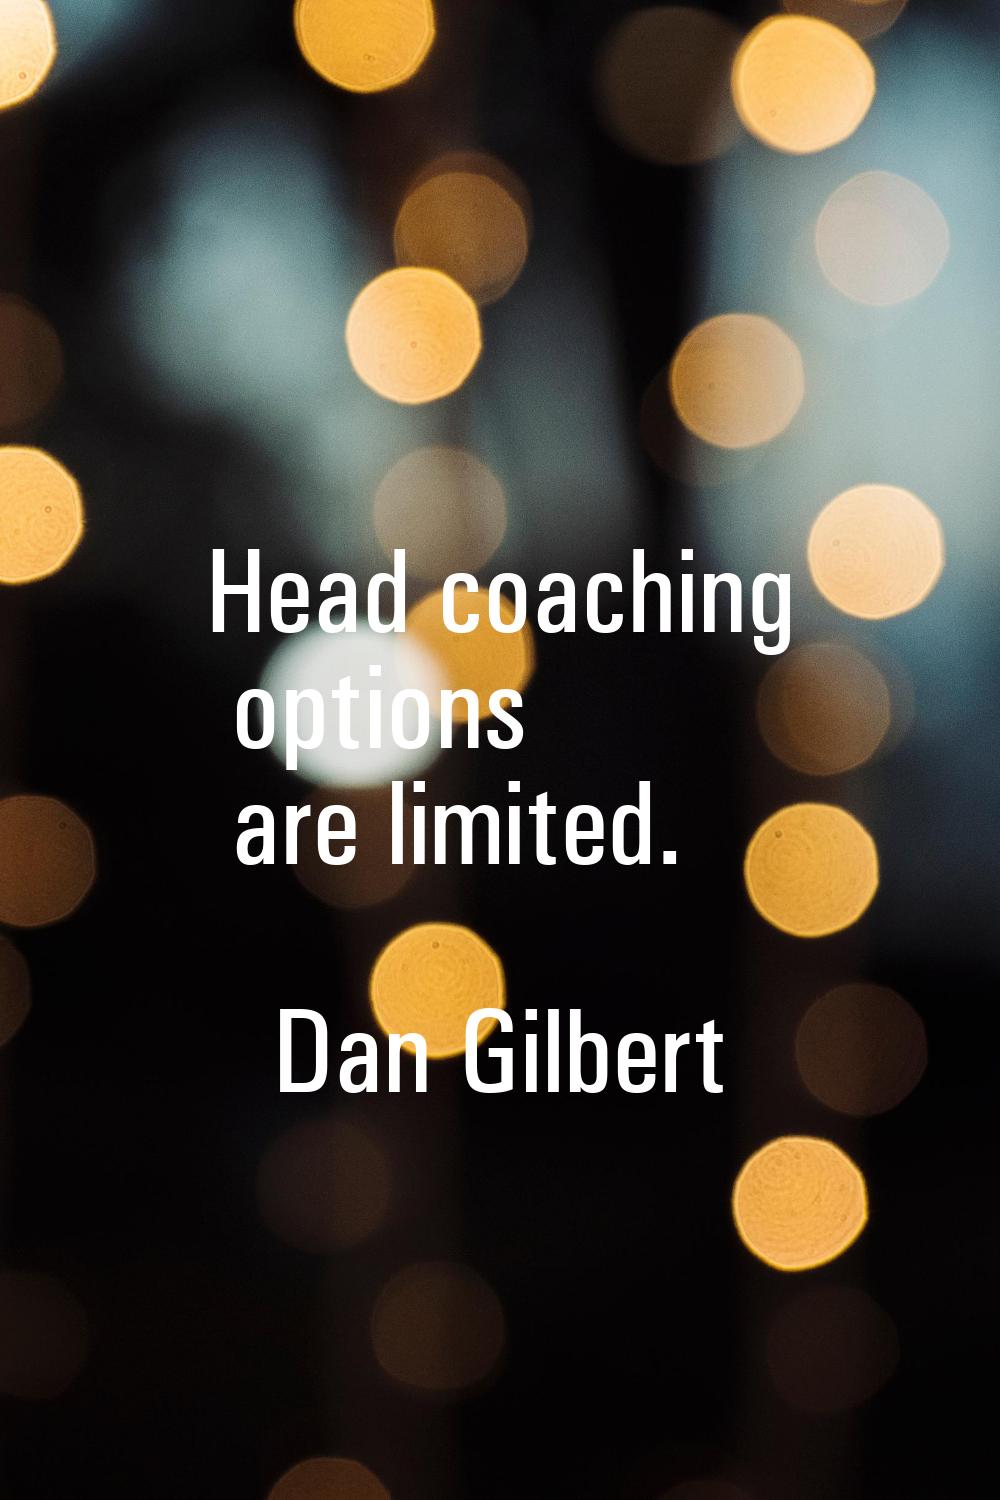 Head coaching options are limited.